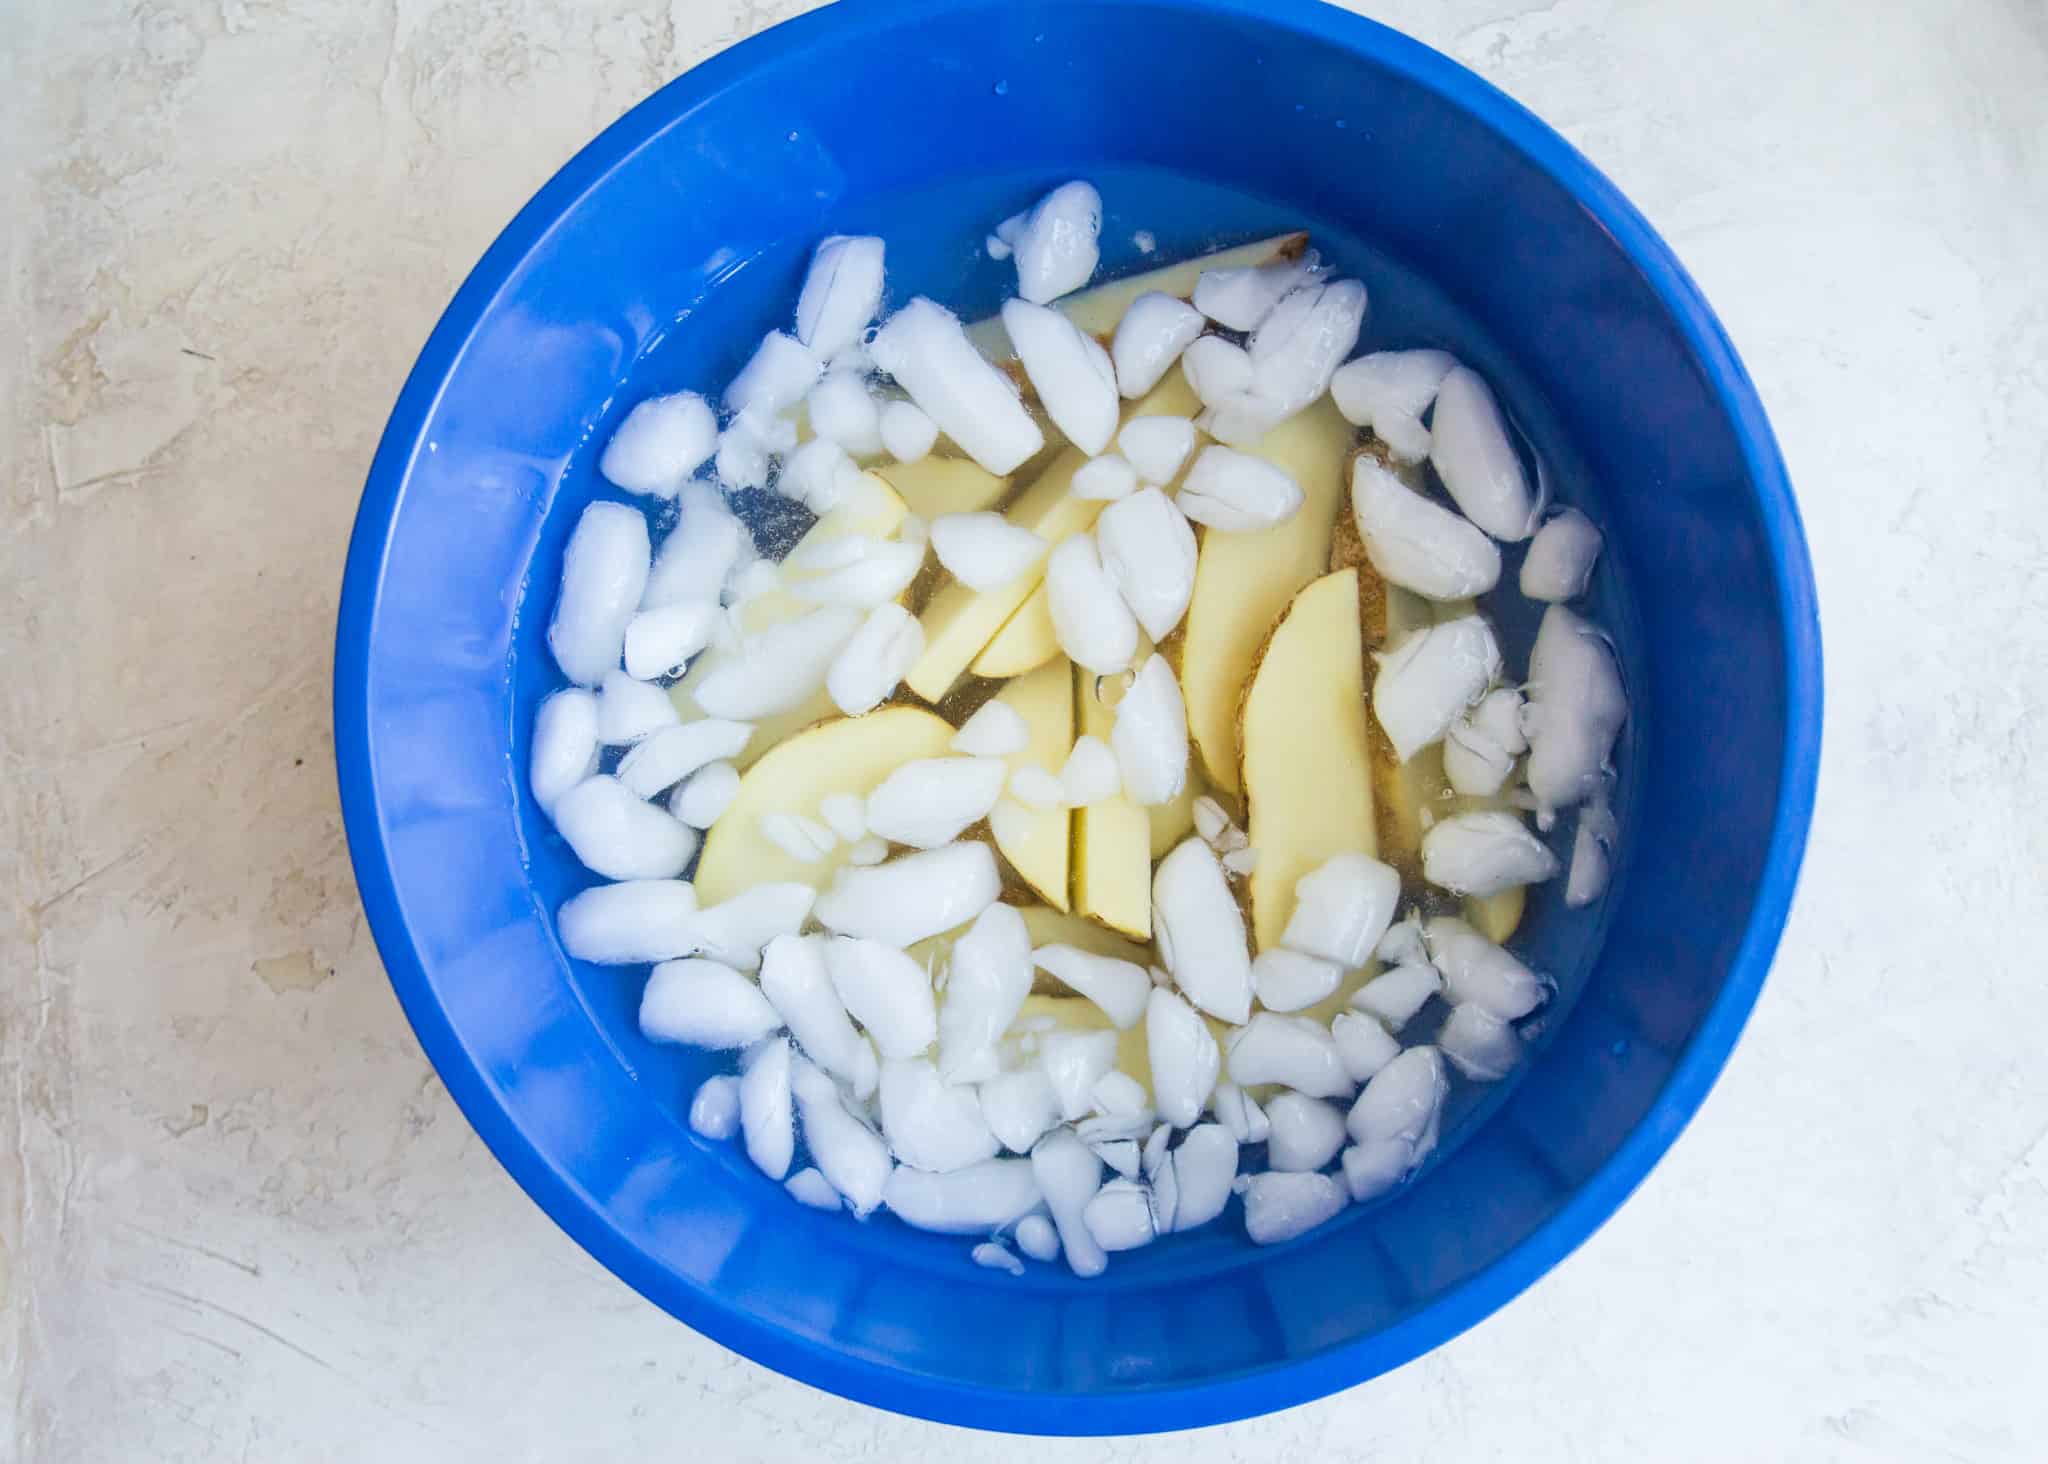 Potato wedges soaking in a bowl of ice water.